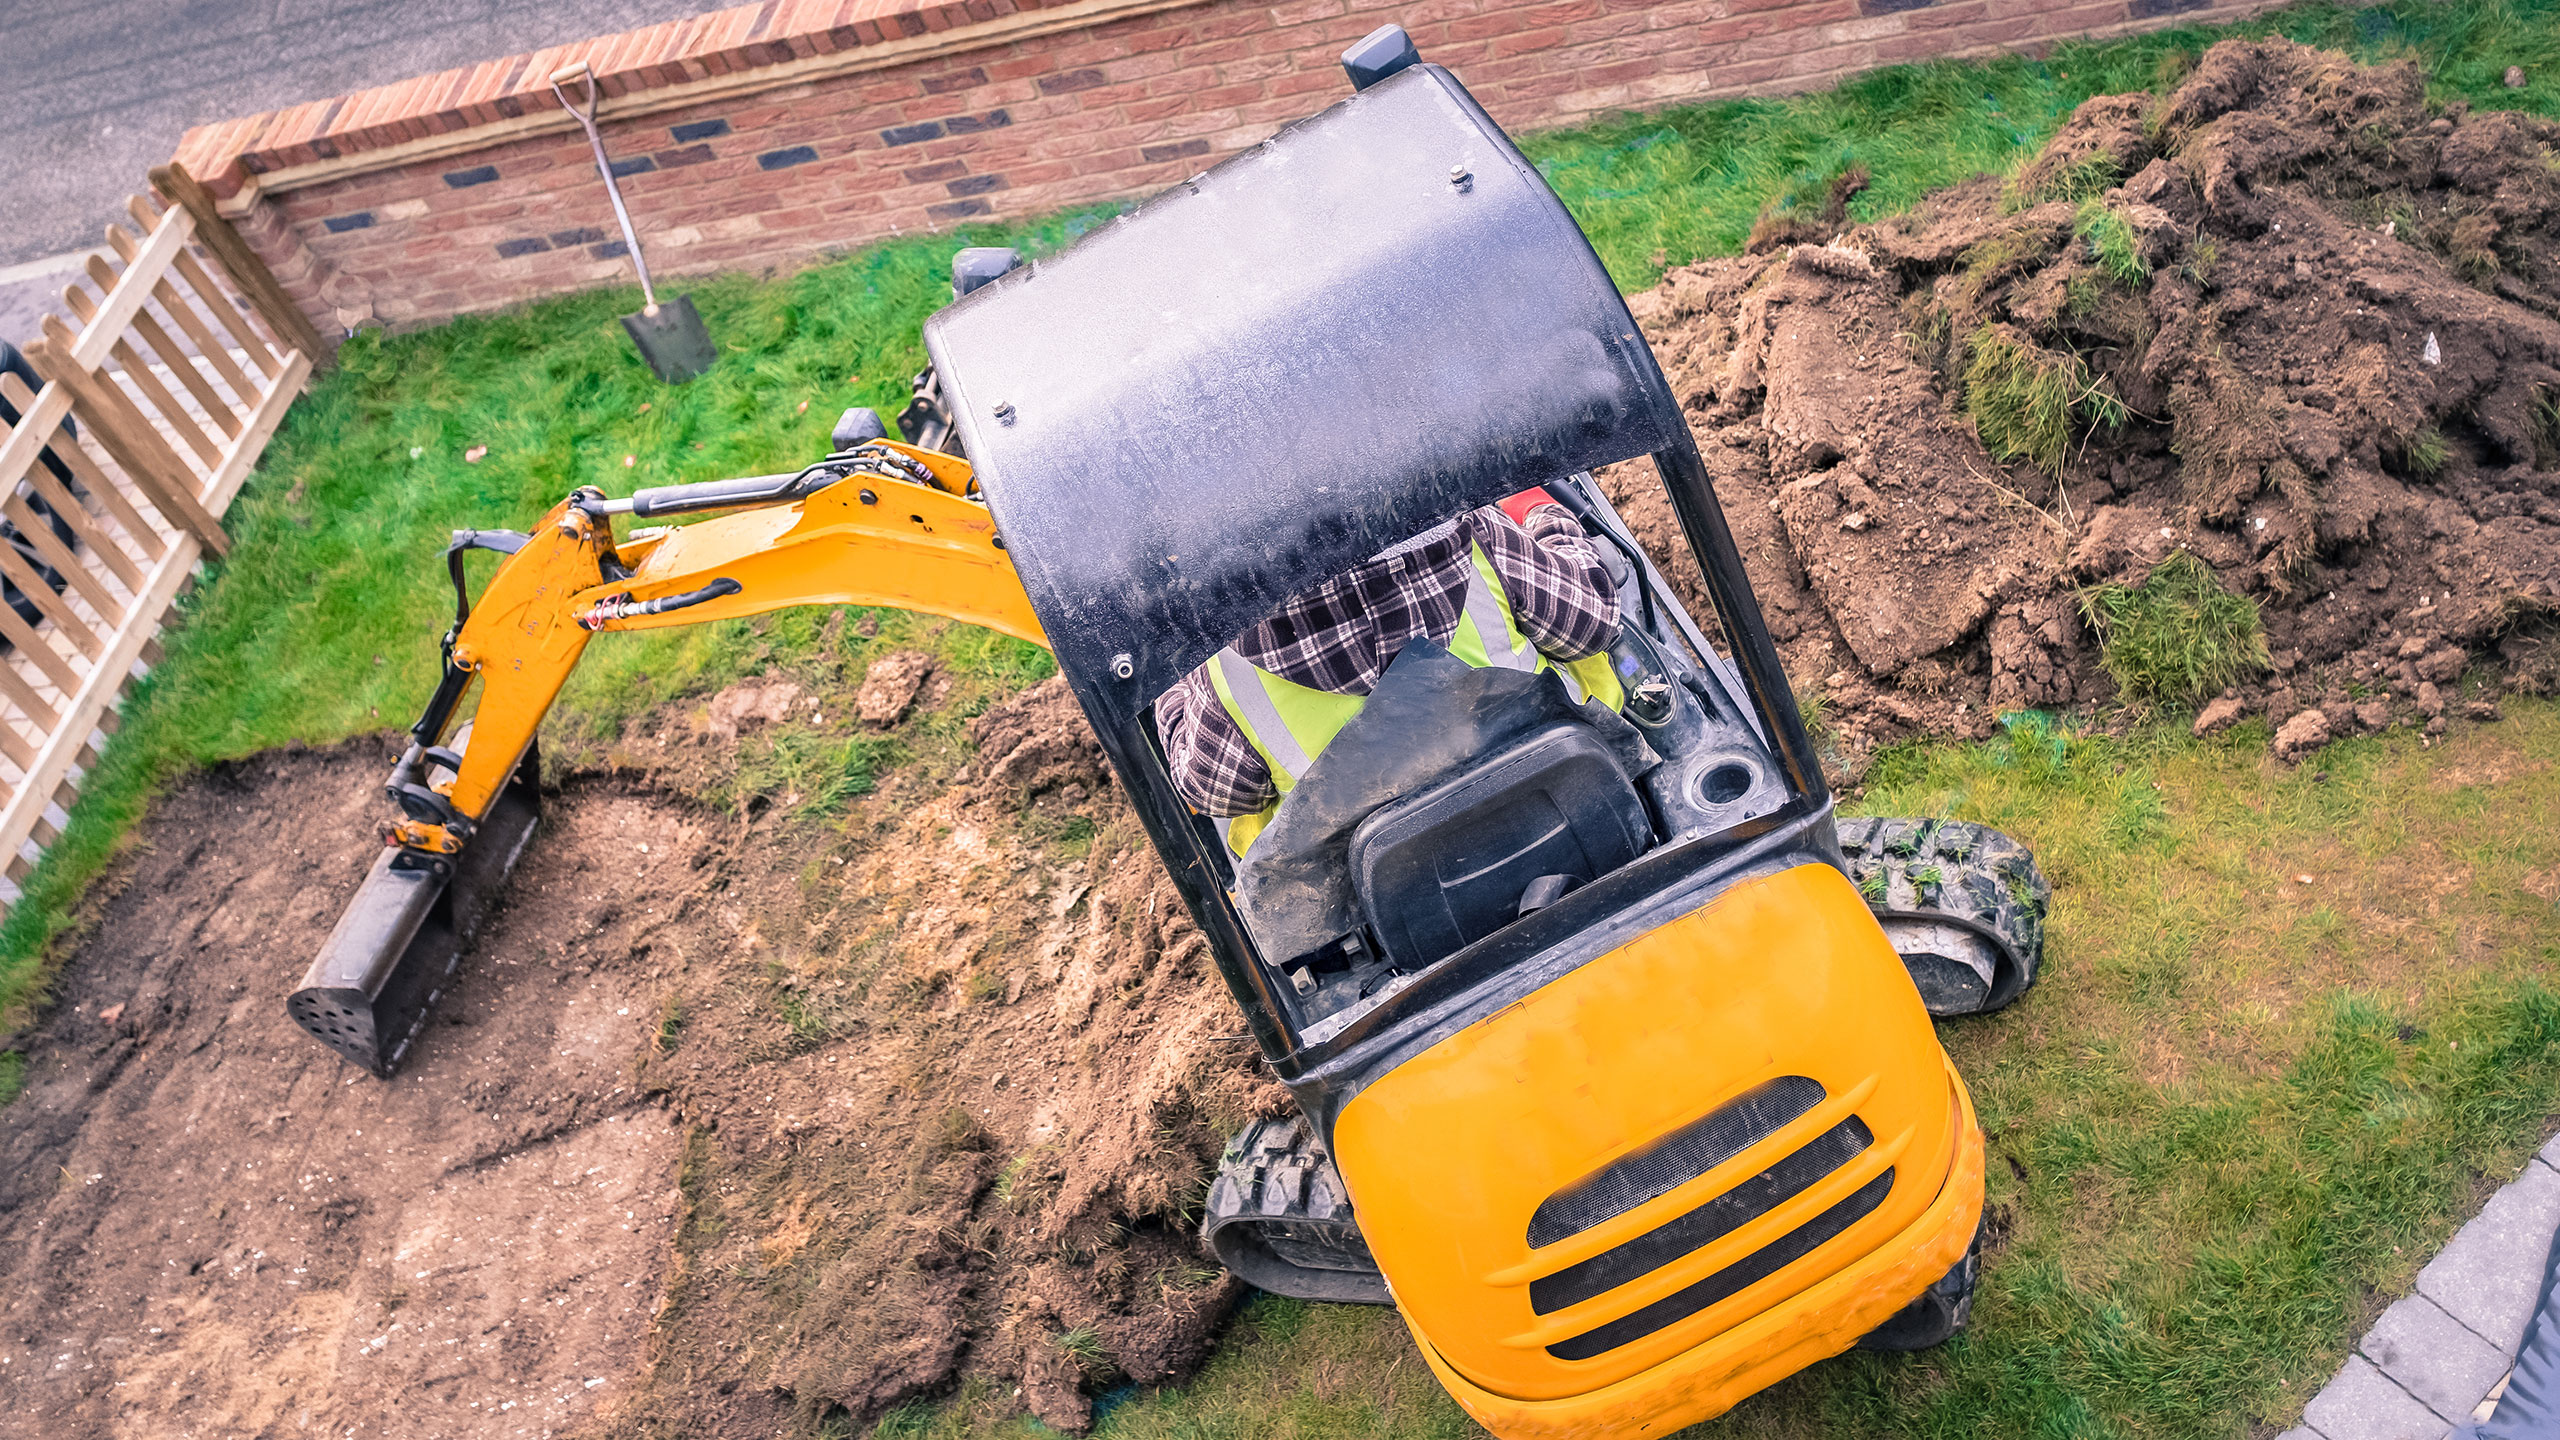 Mini digger insurance applied to this digging machine